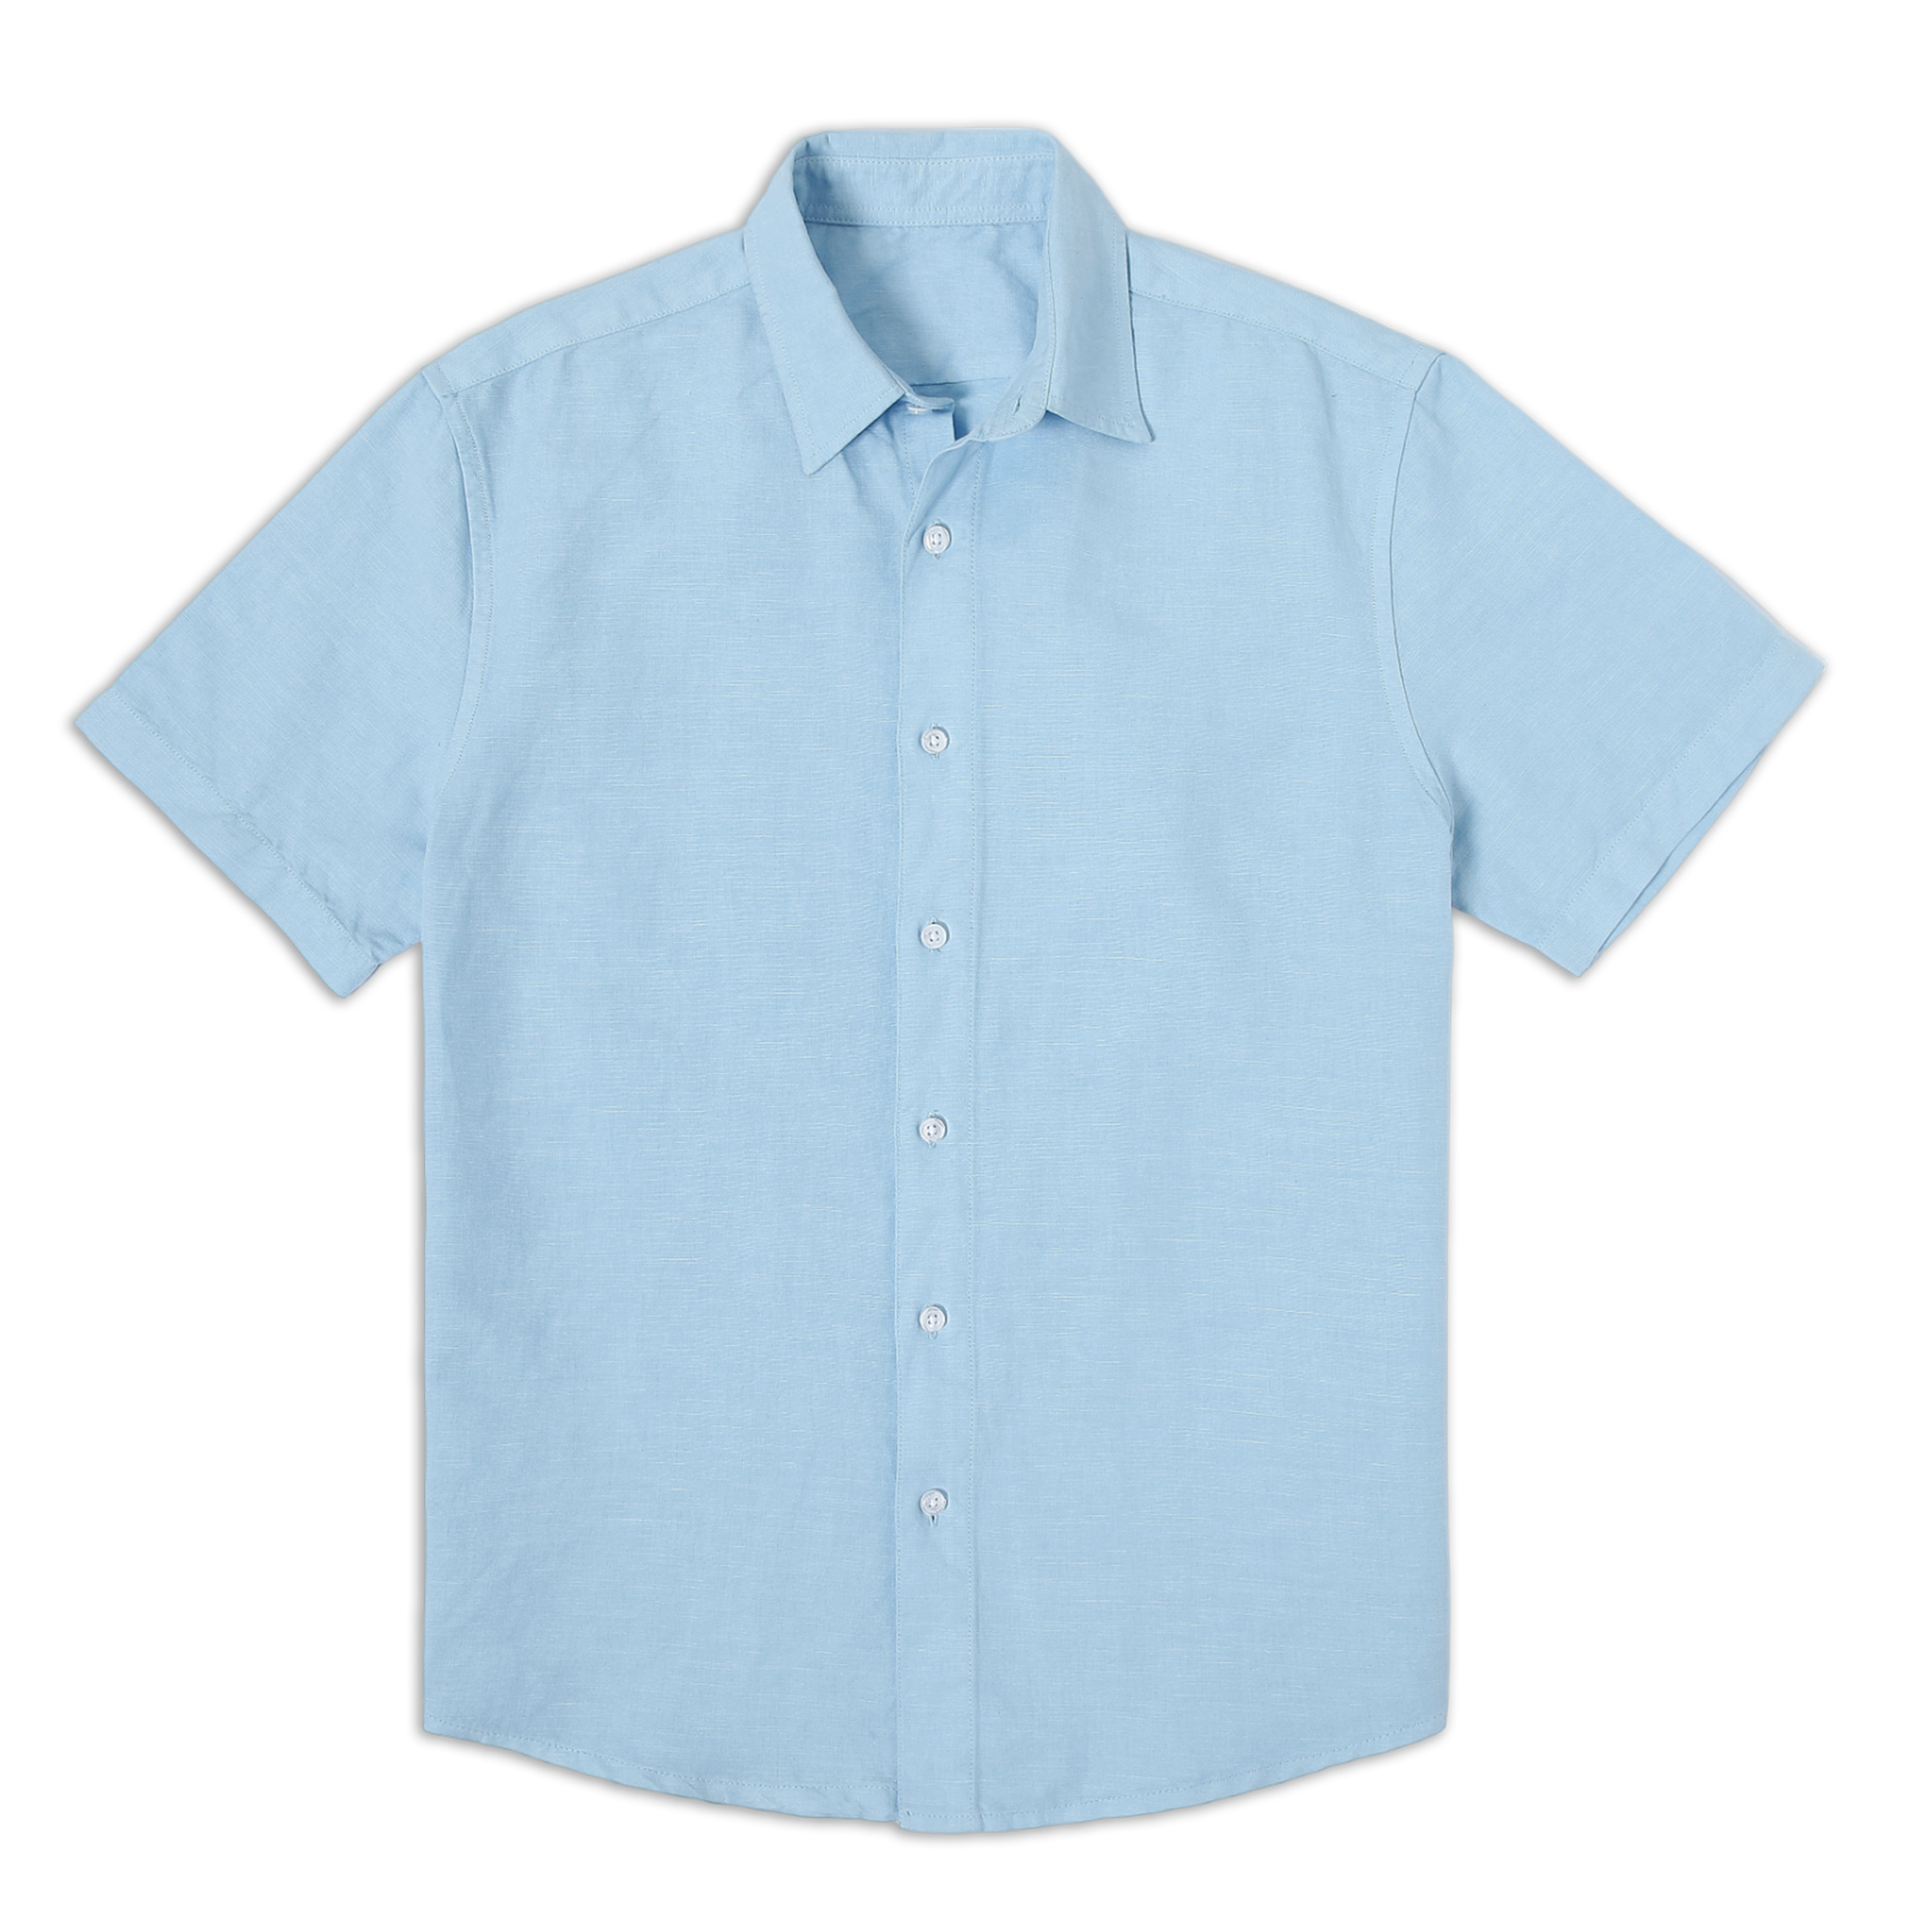 Retreat Linen Shirt Cool Blue front with collar, white buttons, and short sleeves